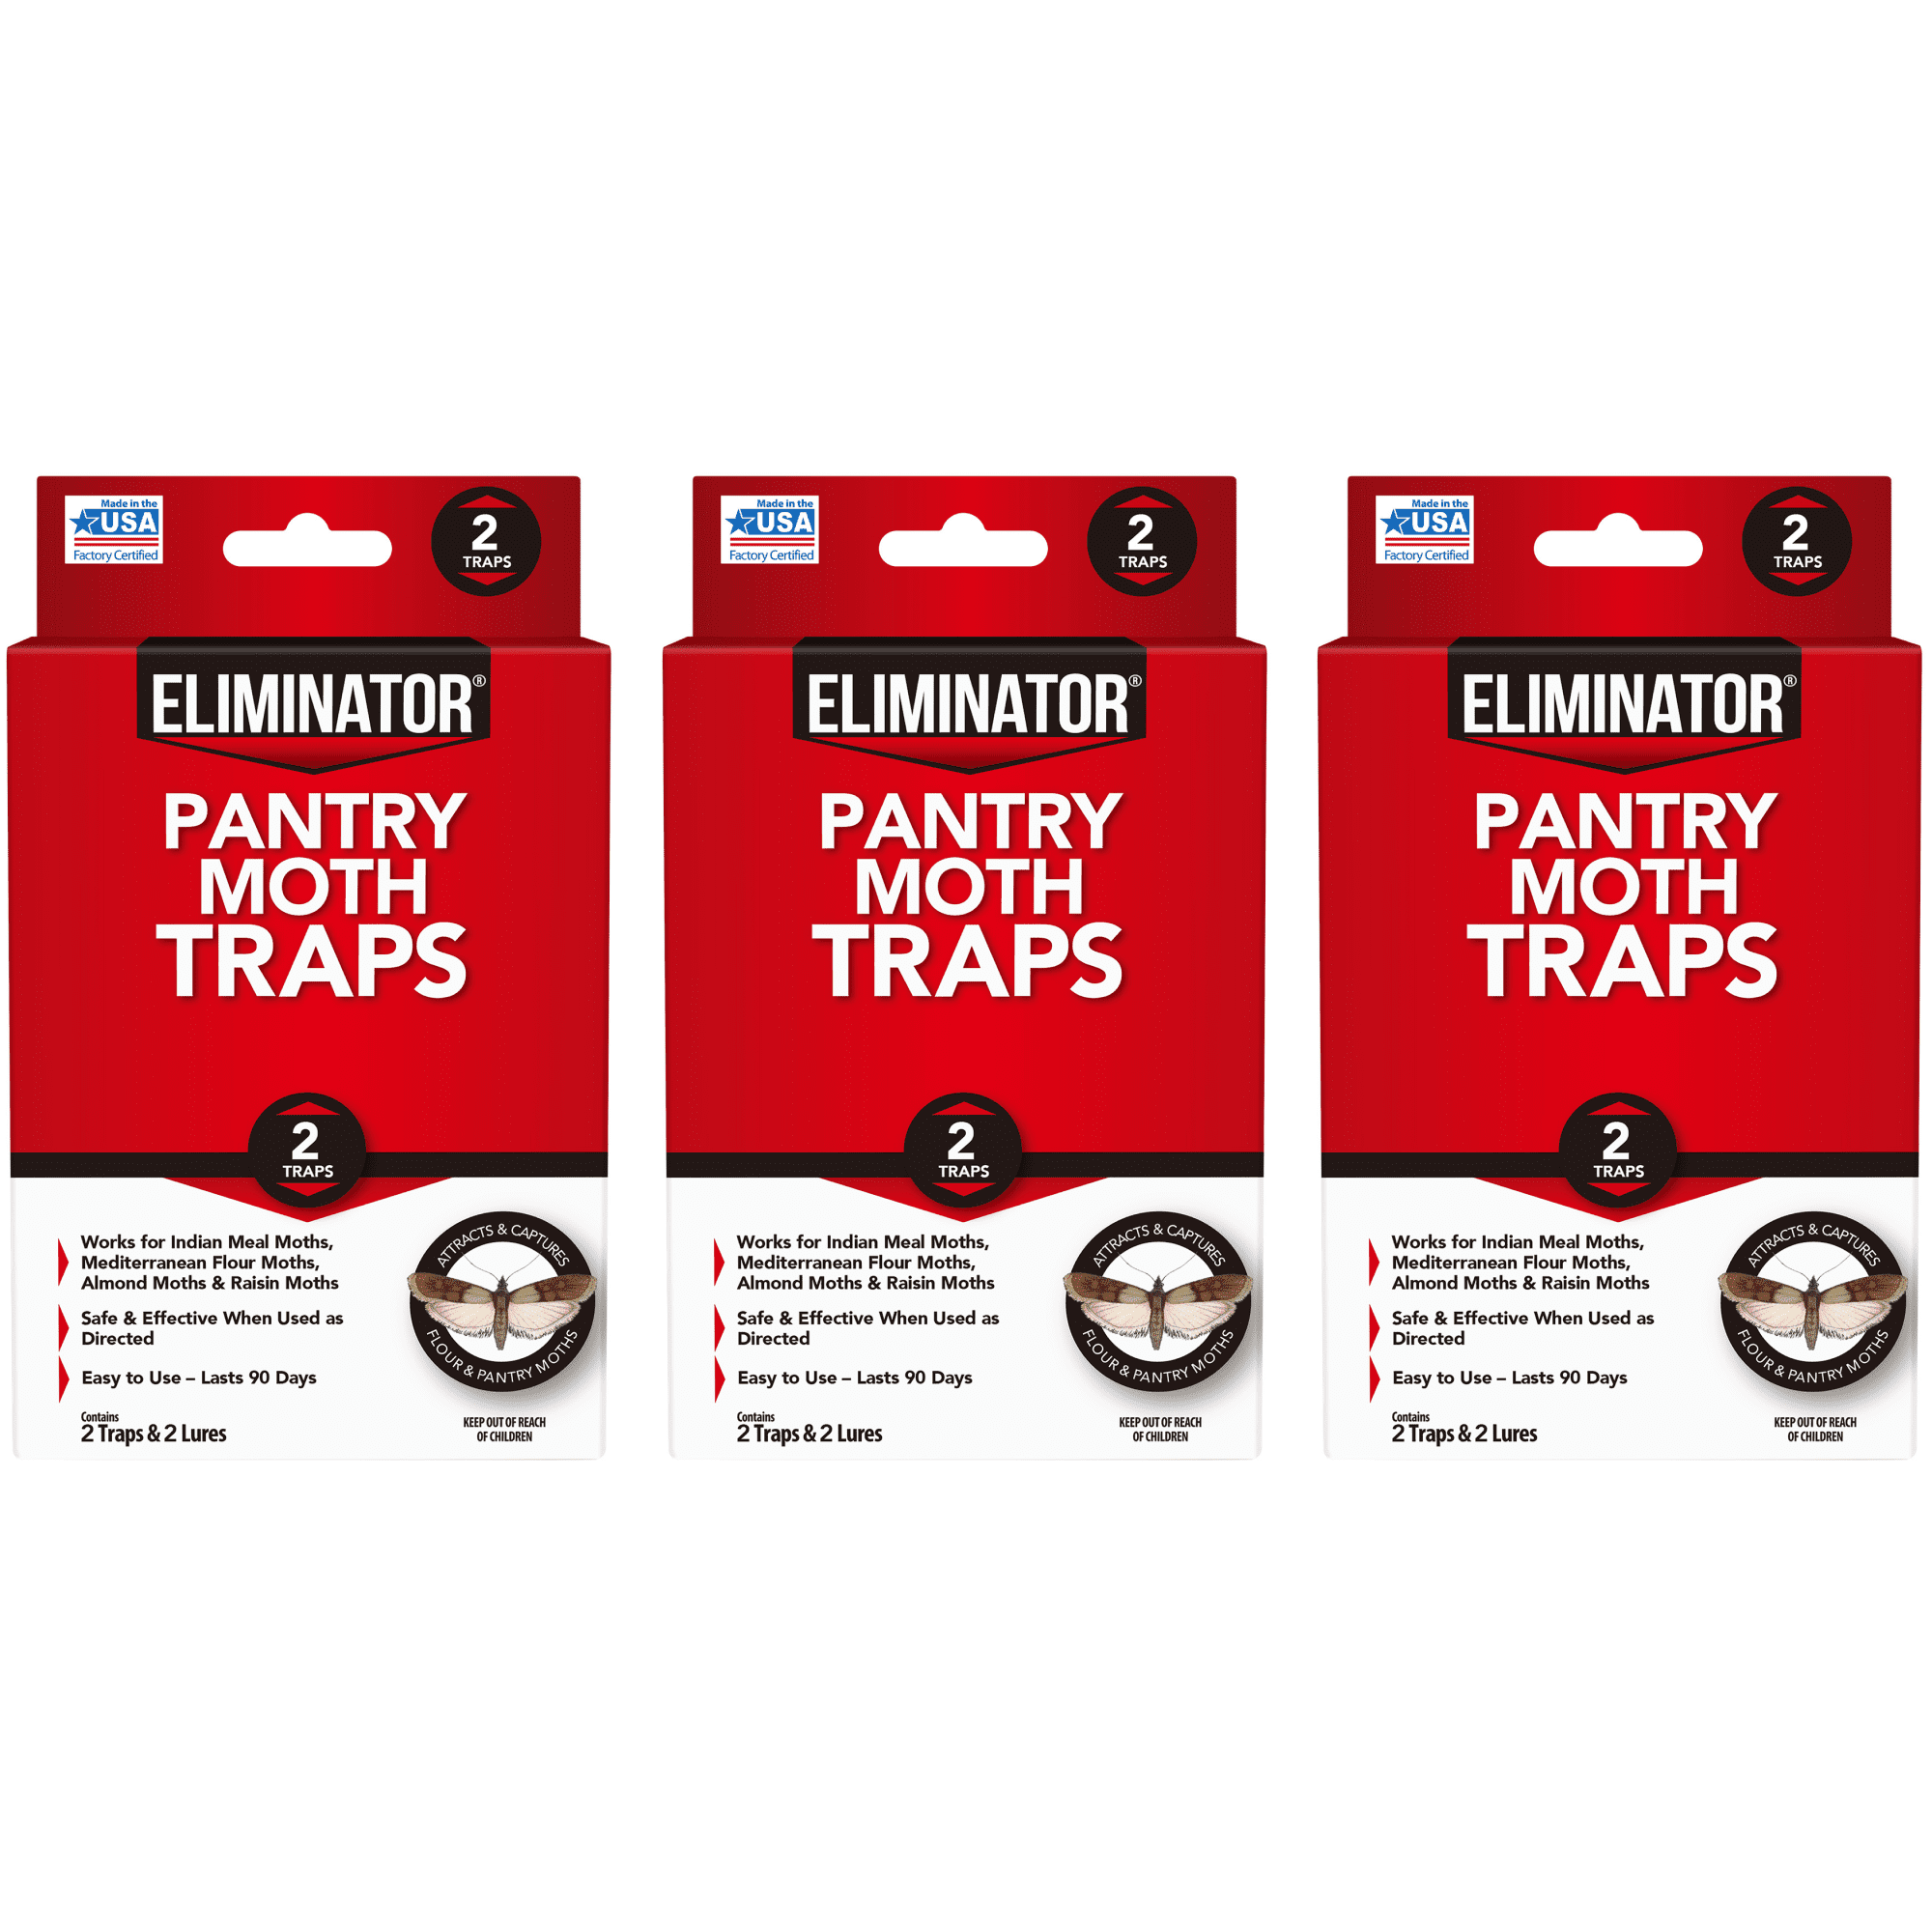 Cupboard Moth Traps - 2 Traps & 2 Lures